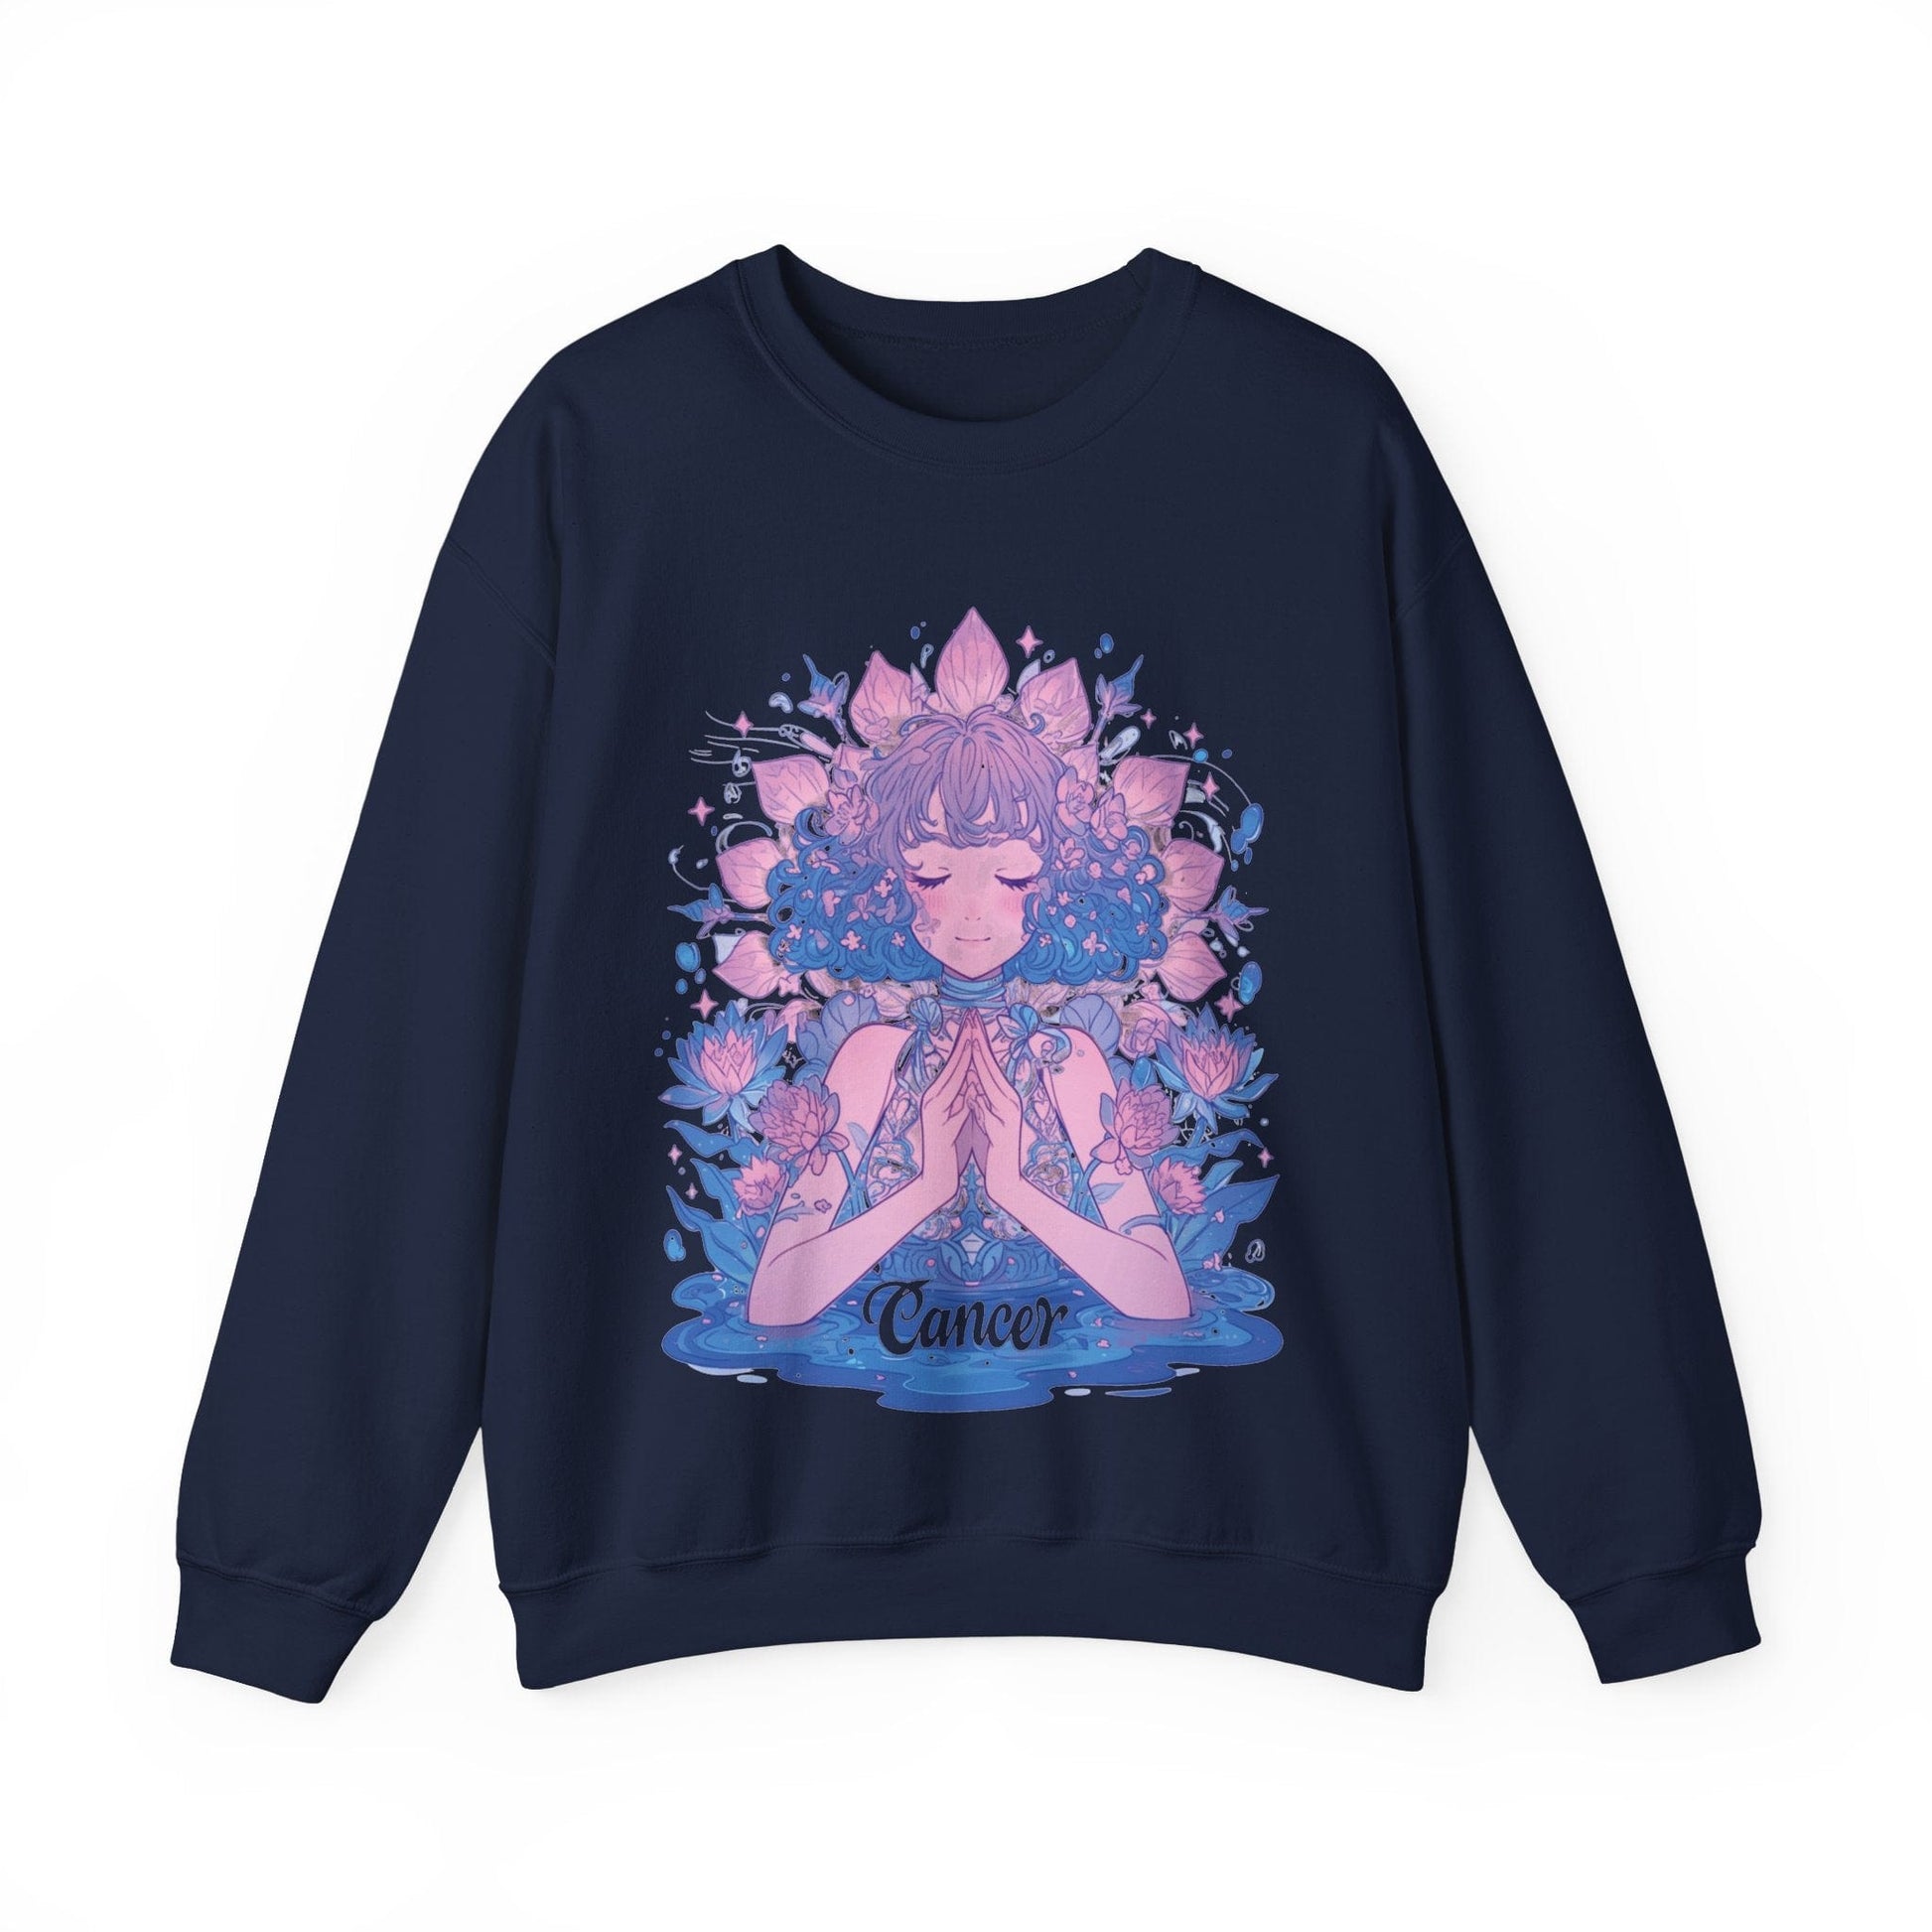 Sweatshirt S / Navy Lunar Bloom Cancer Sweater: Embrace Tranquility